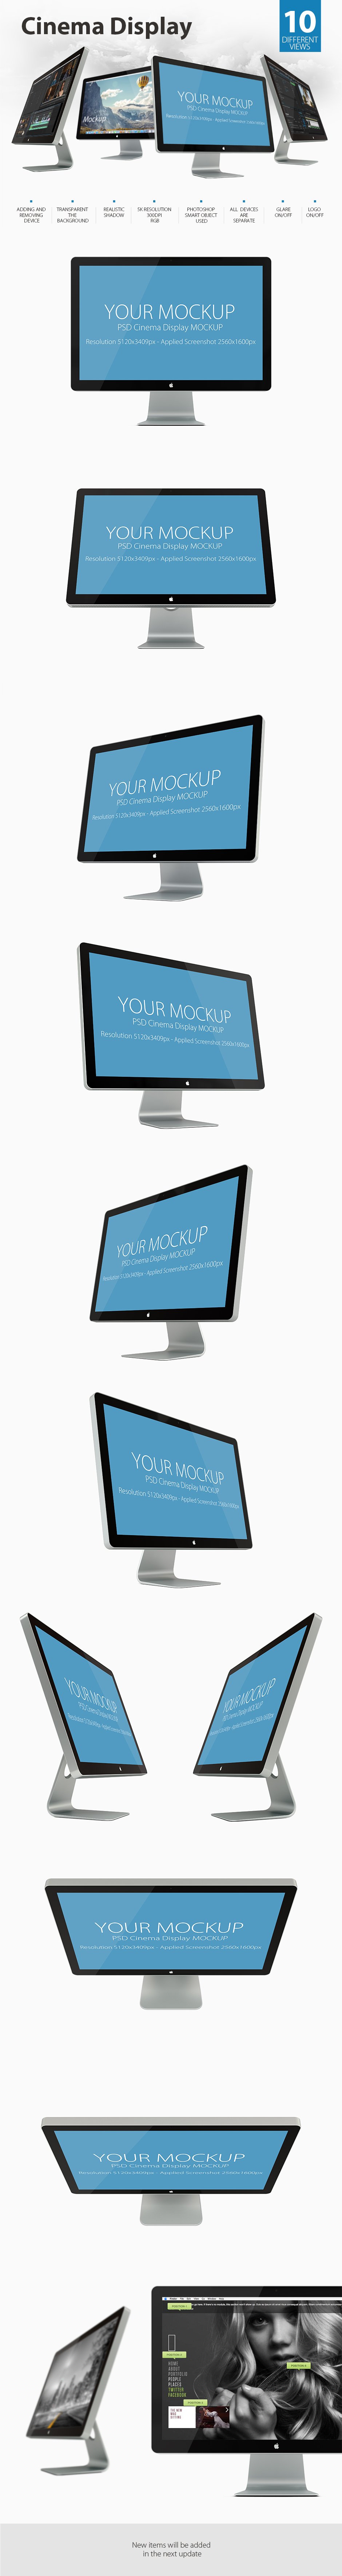 Apple Devices Mockups